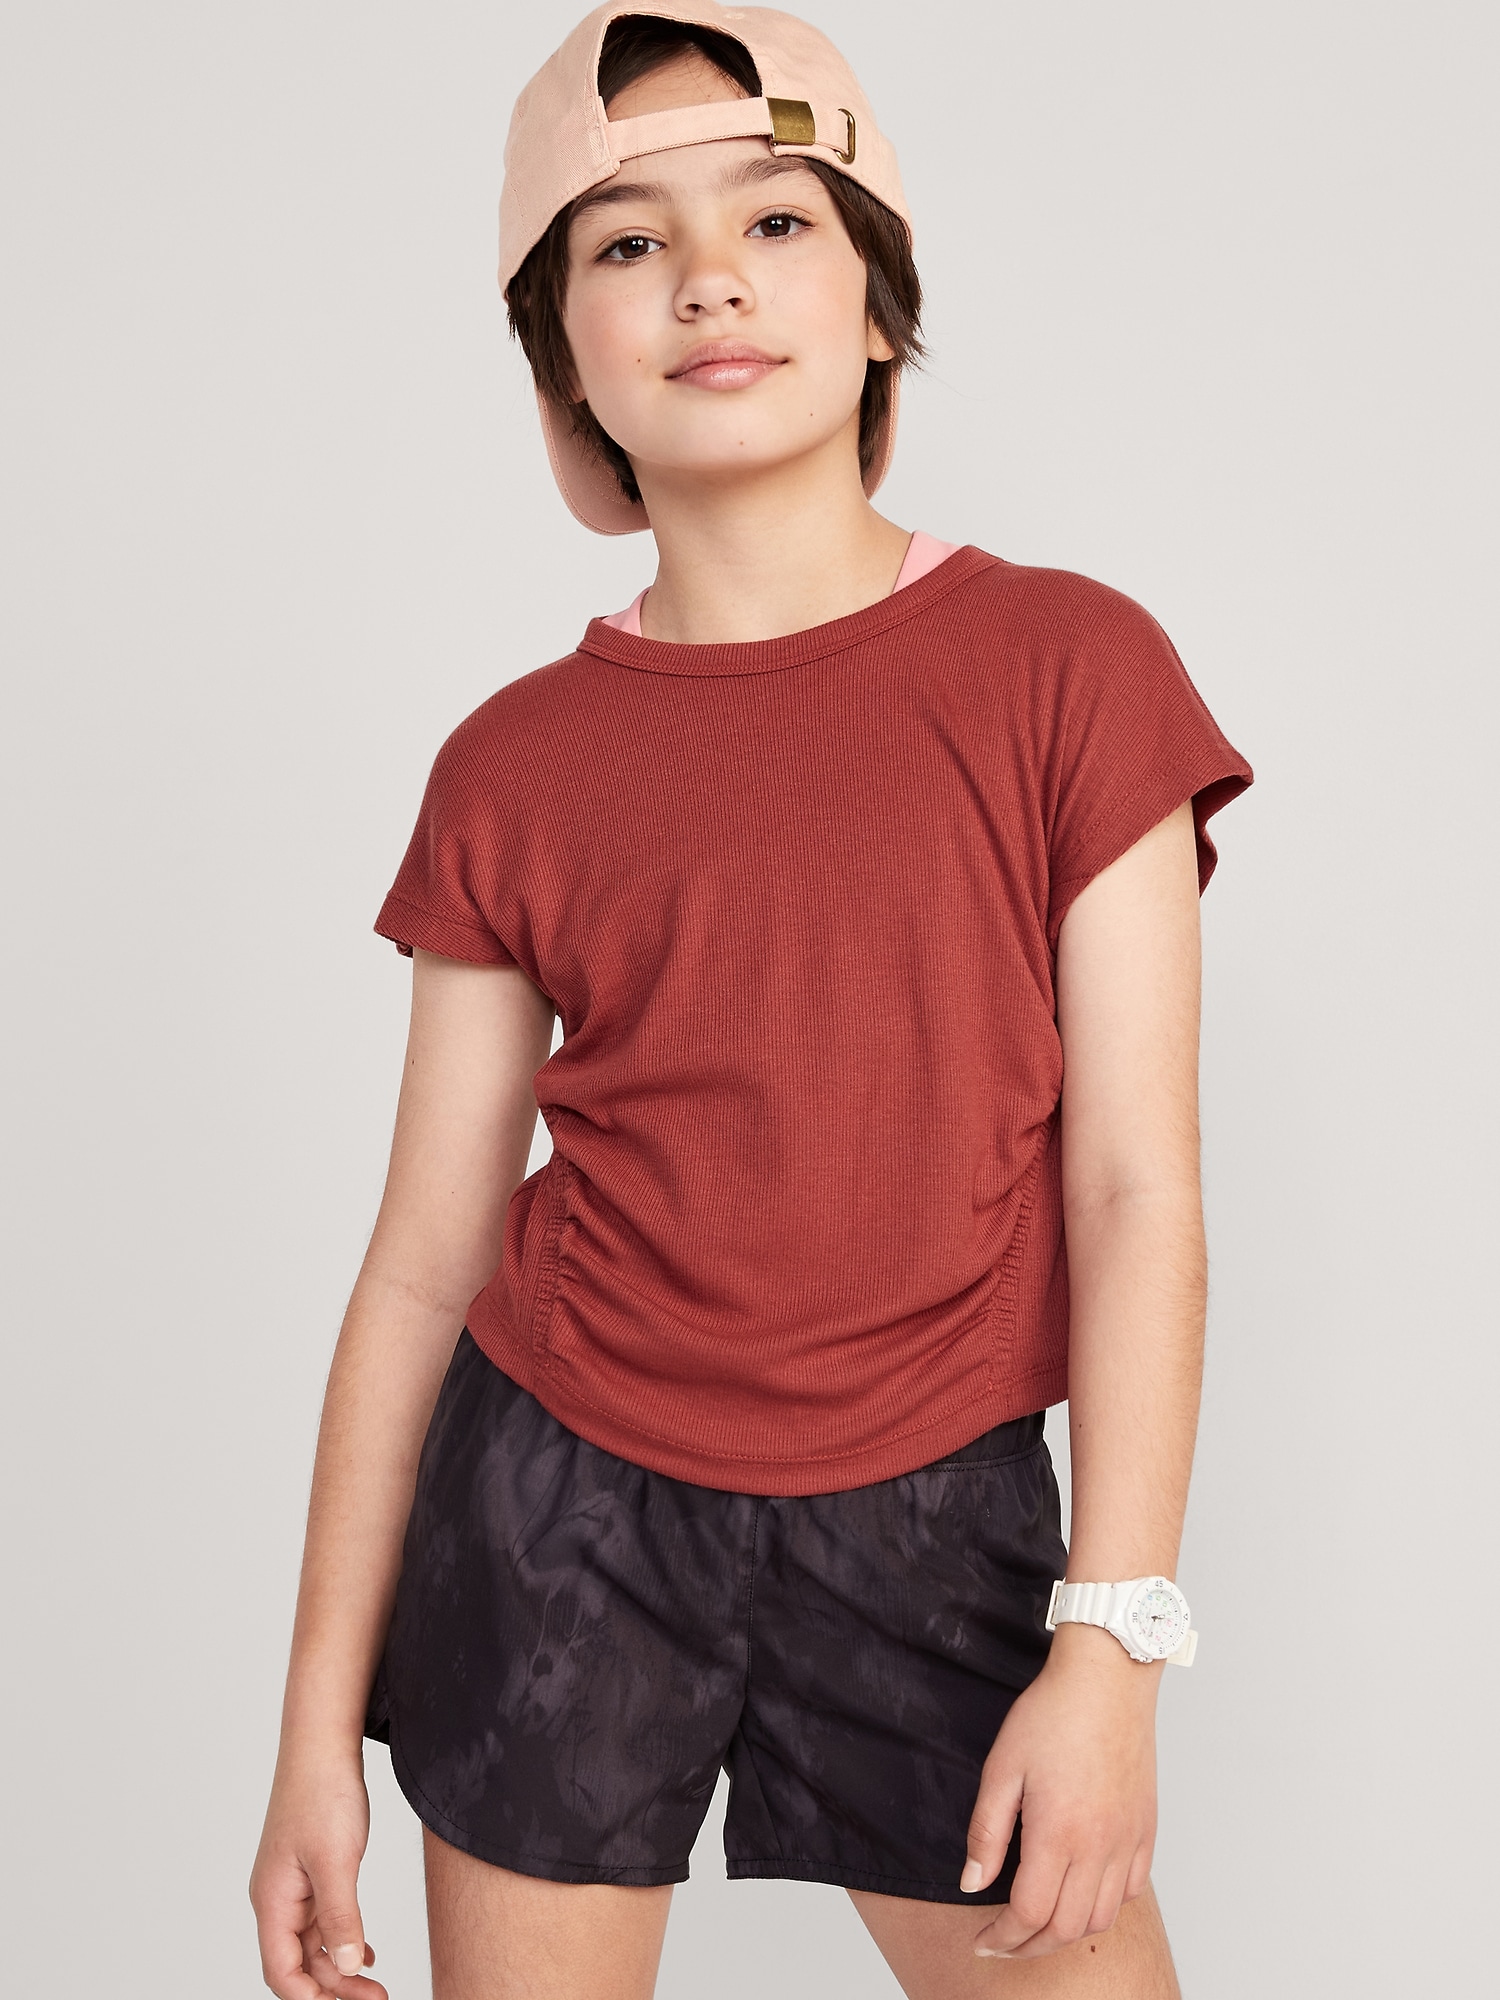 Old Navy UltraLite Short-Sleeve Rib-Knit Side-Ruched T-Shirt for Girls red. 1